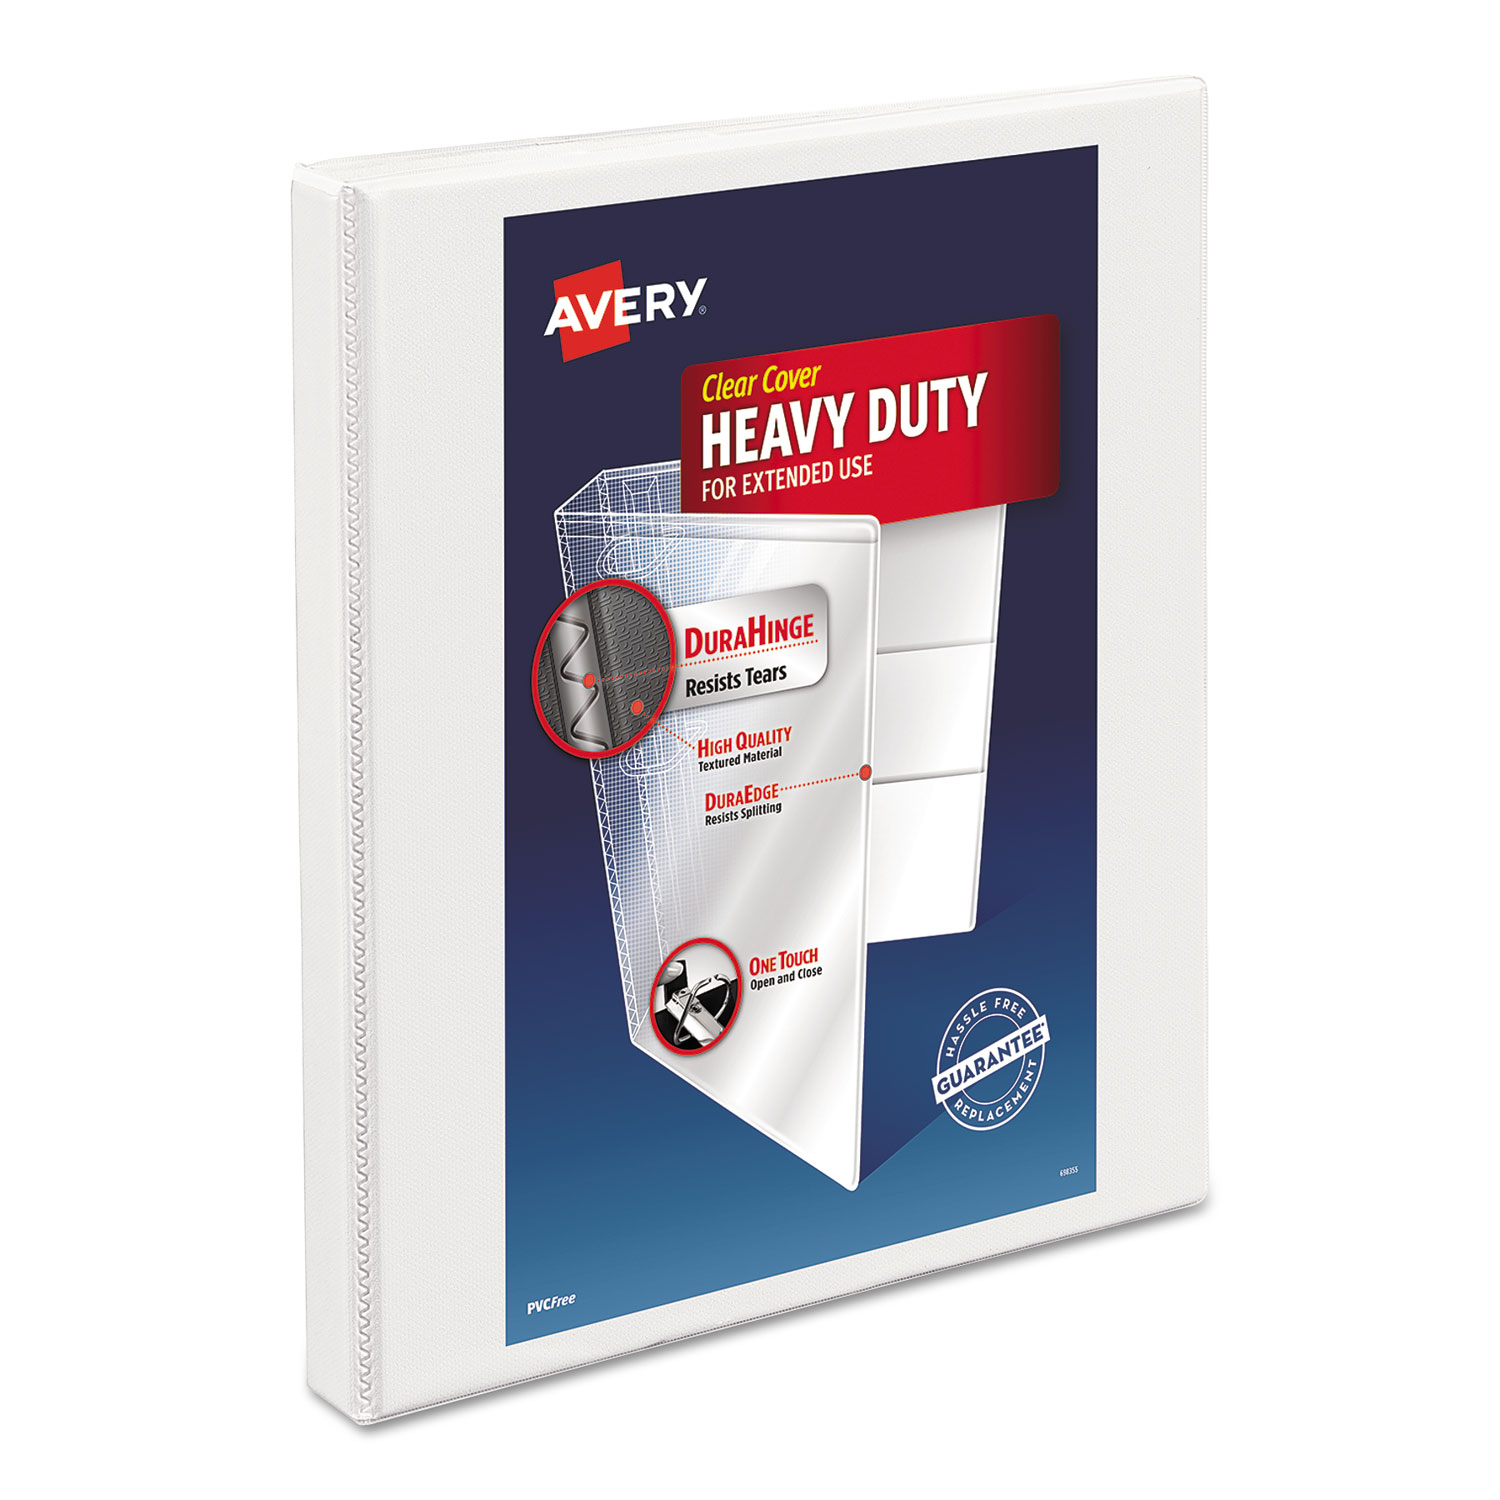  Avery 05234 Heavy-Duty Non Stick View Binder with DuraHinge and Slant Rings, 3 Rings, 0.5 Capacity, 11 x 8.5, White (AVE05234) 